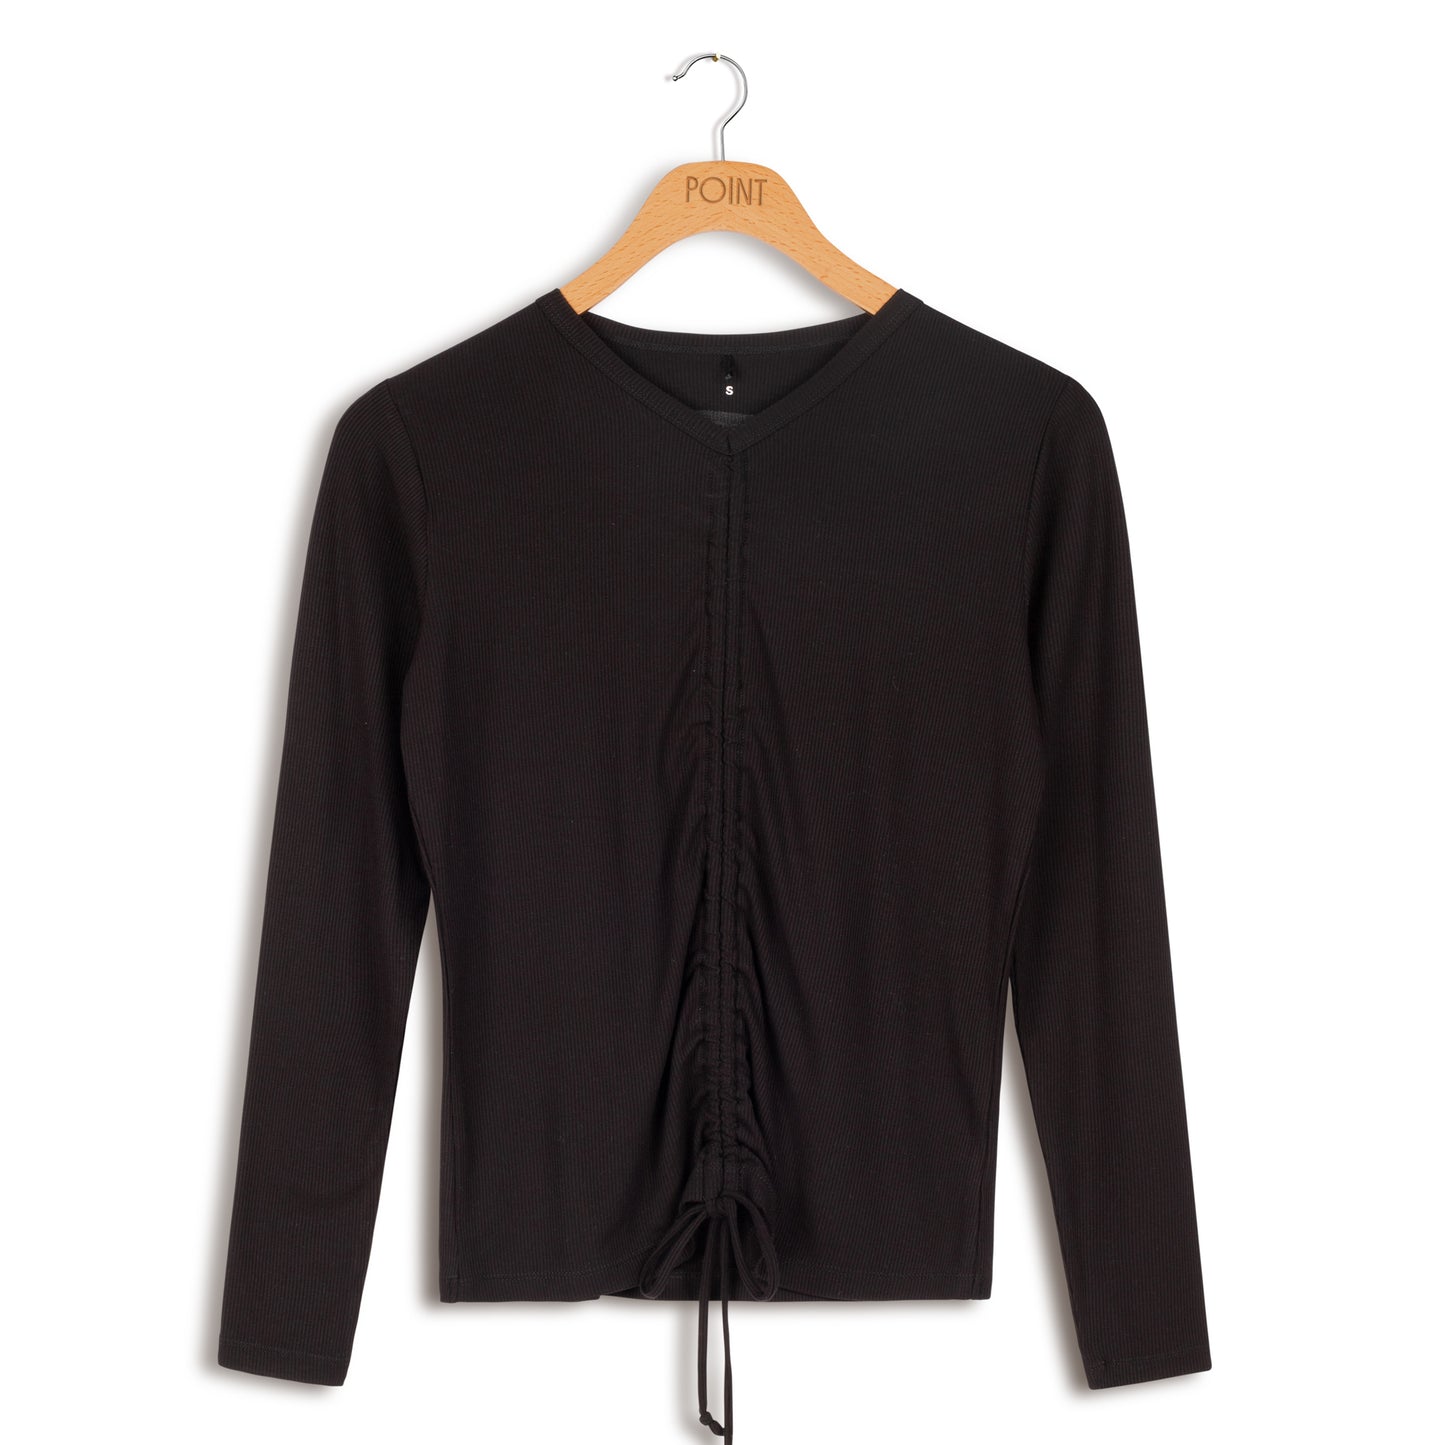 POINT L/S CROPPED RUCH TOP